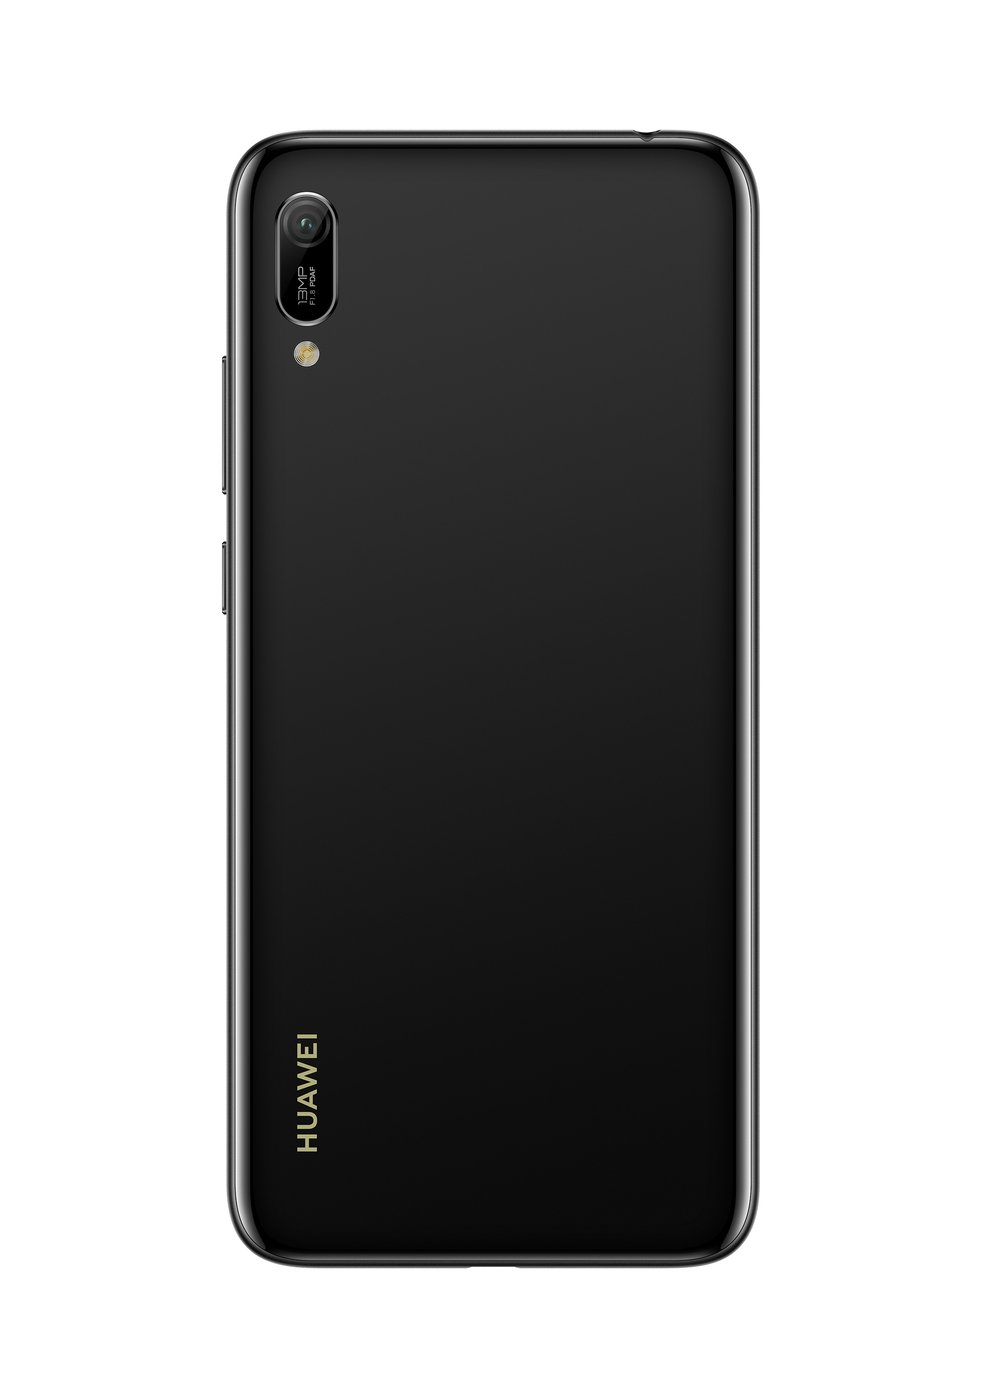 Vodafone Huawei Y6 32GB Mobile Phone Review